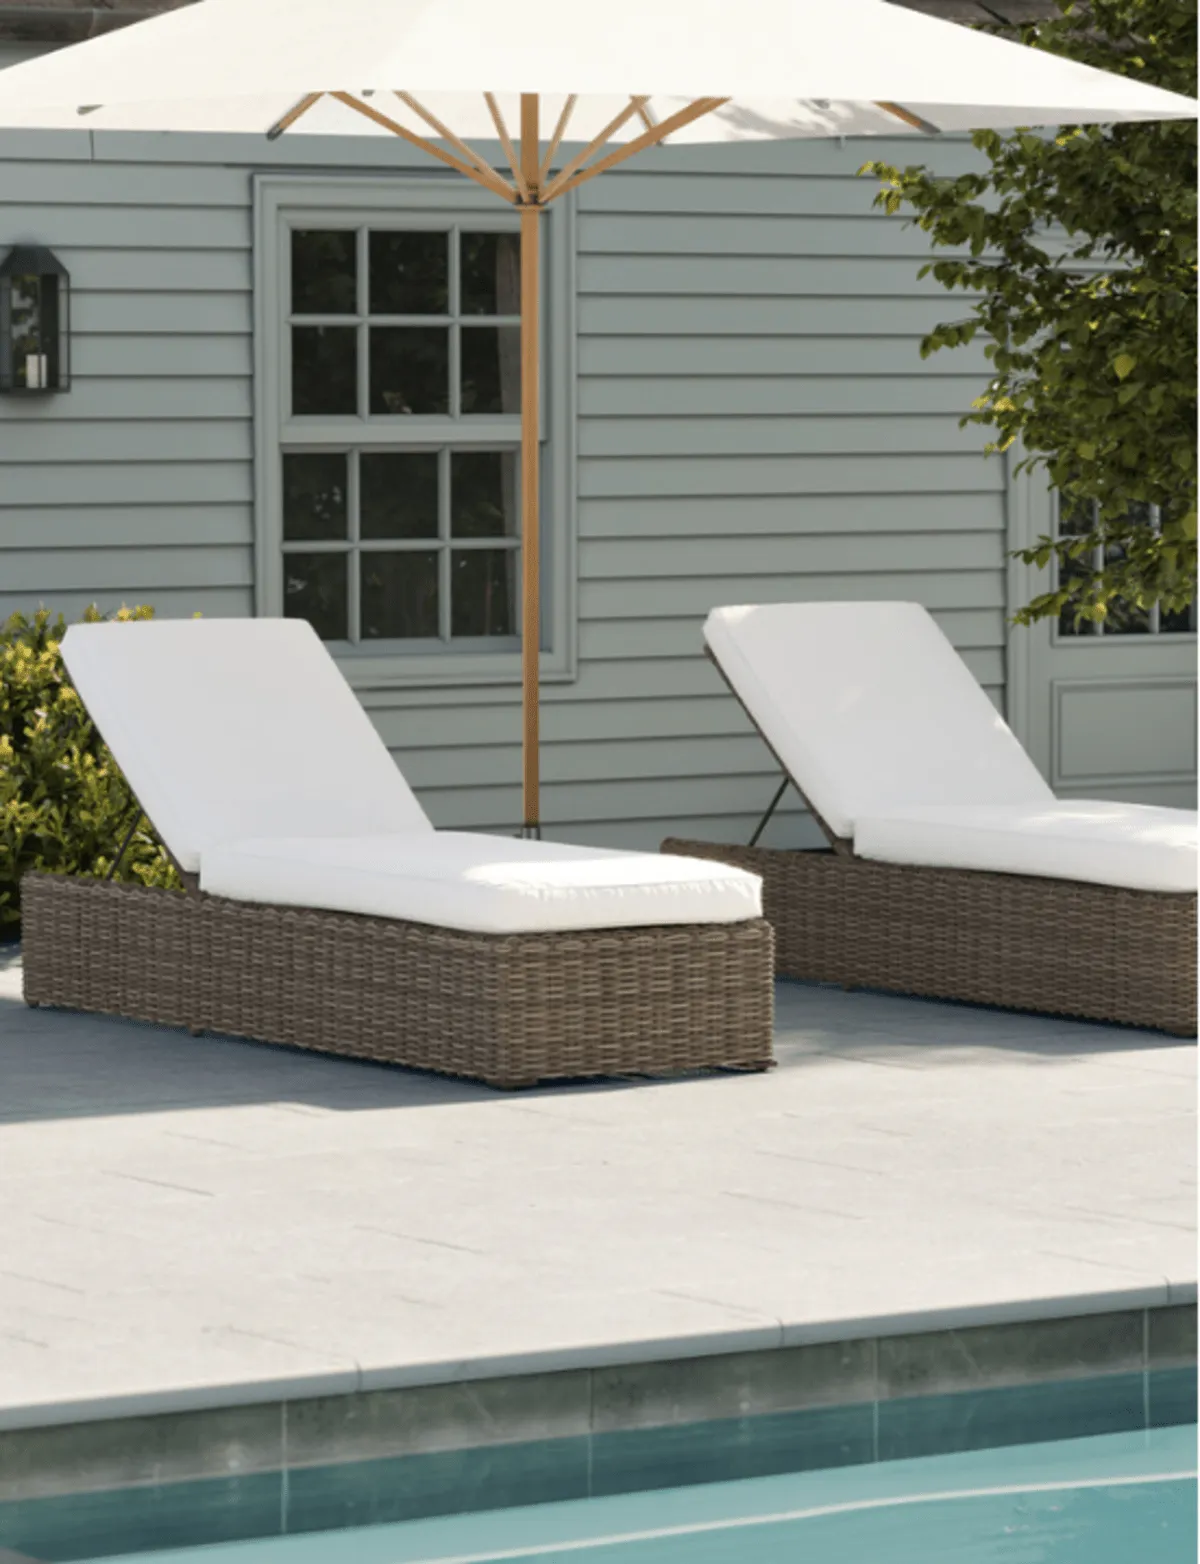 Two rattan pool loungers with thick white cushions